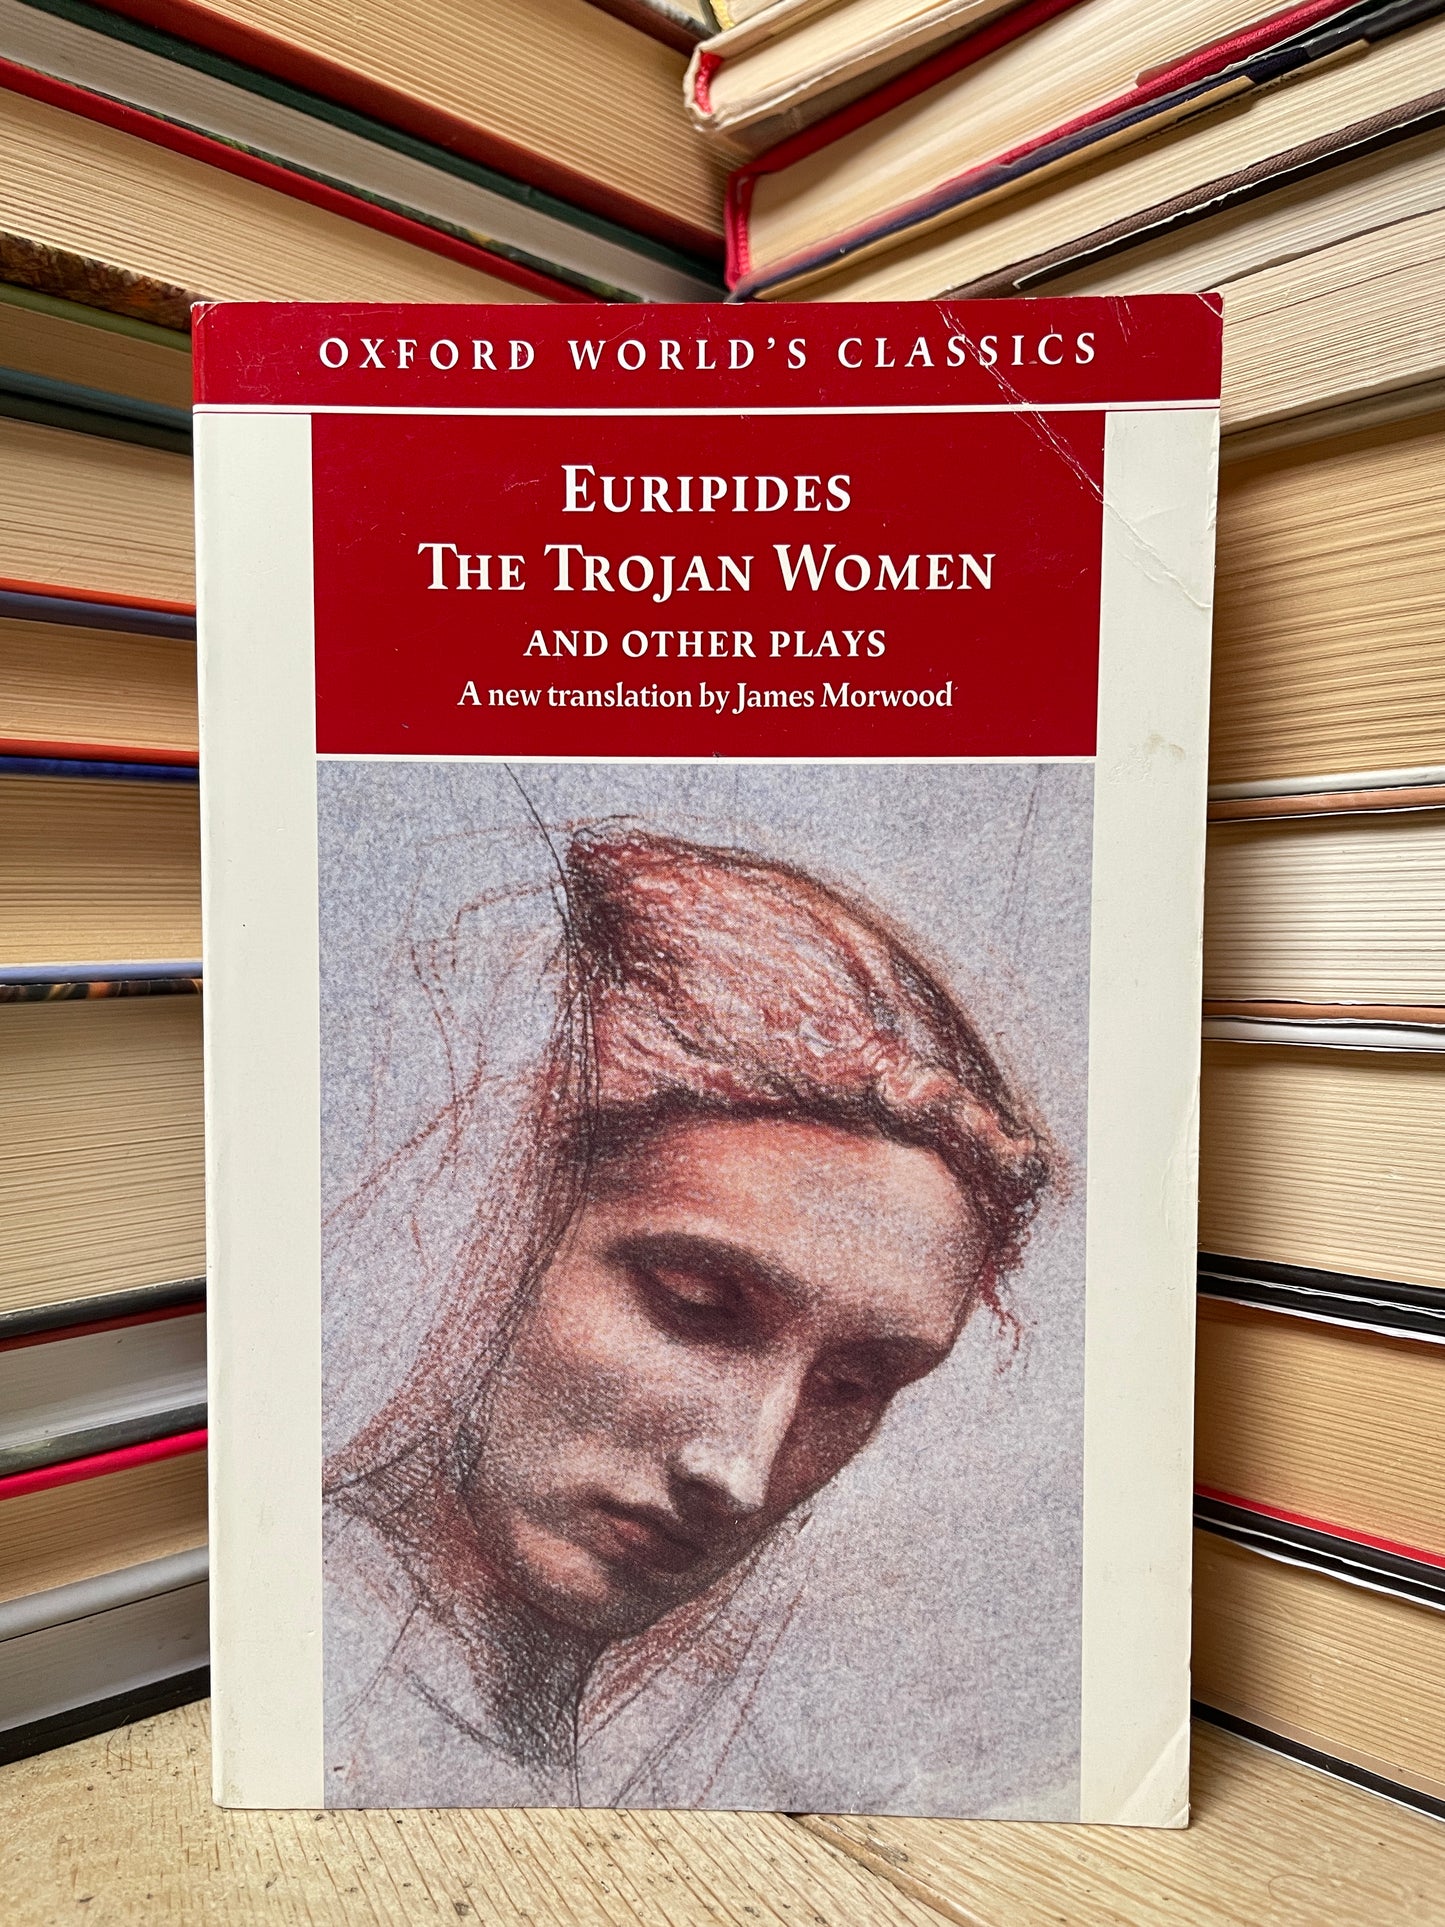 Euripides - The Trojan Women and Other Plays